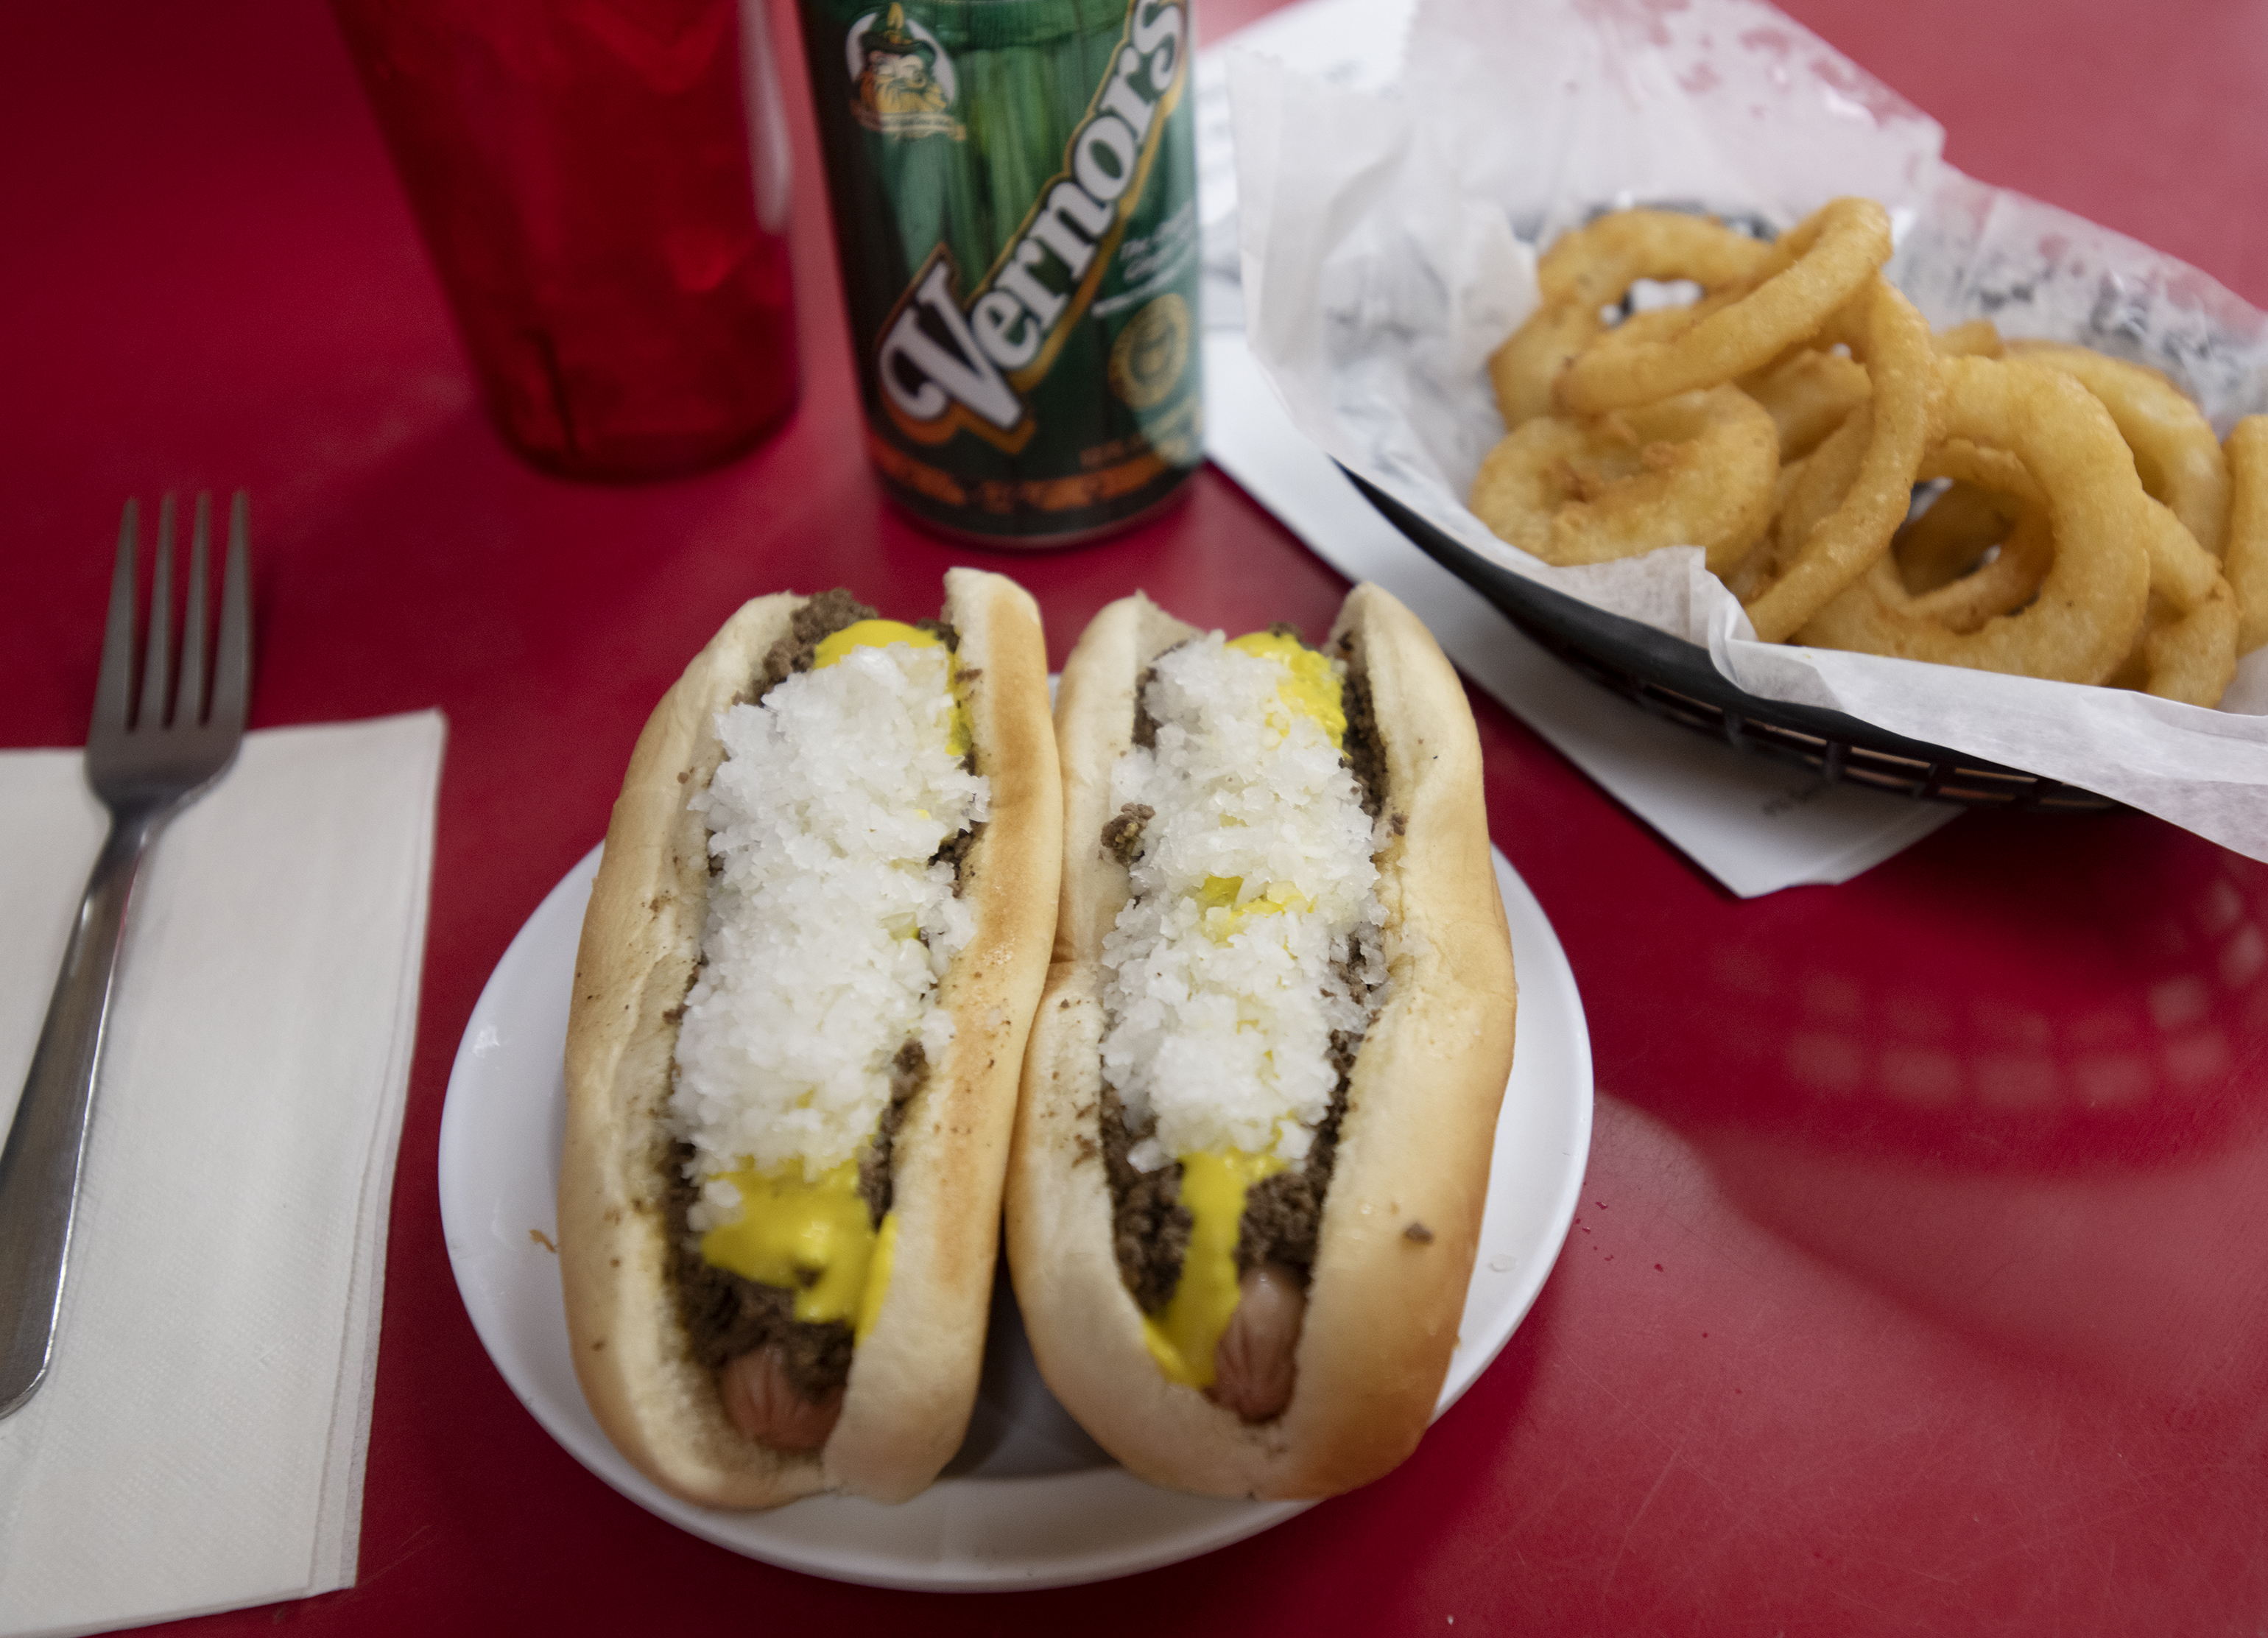 Coneys are served at Virginia Coney Island, 649 E. Michigan Ave., on Monday, July 6, 2020. The restaurant has been serving the Jackson community since 1914.